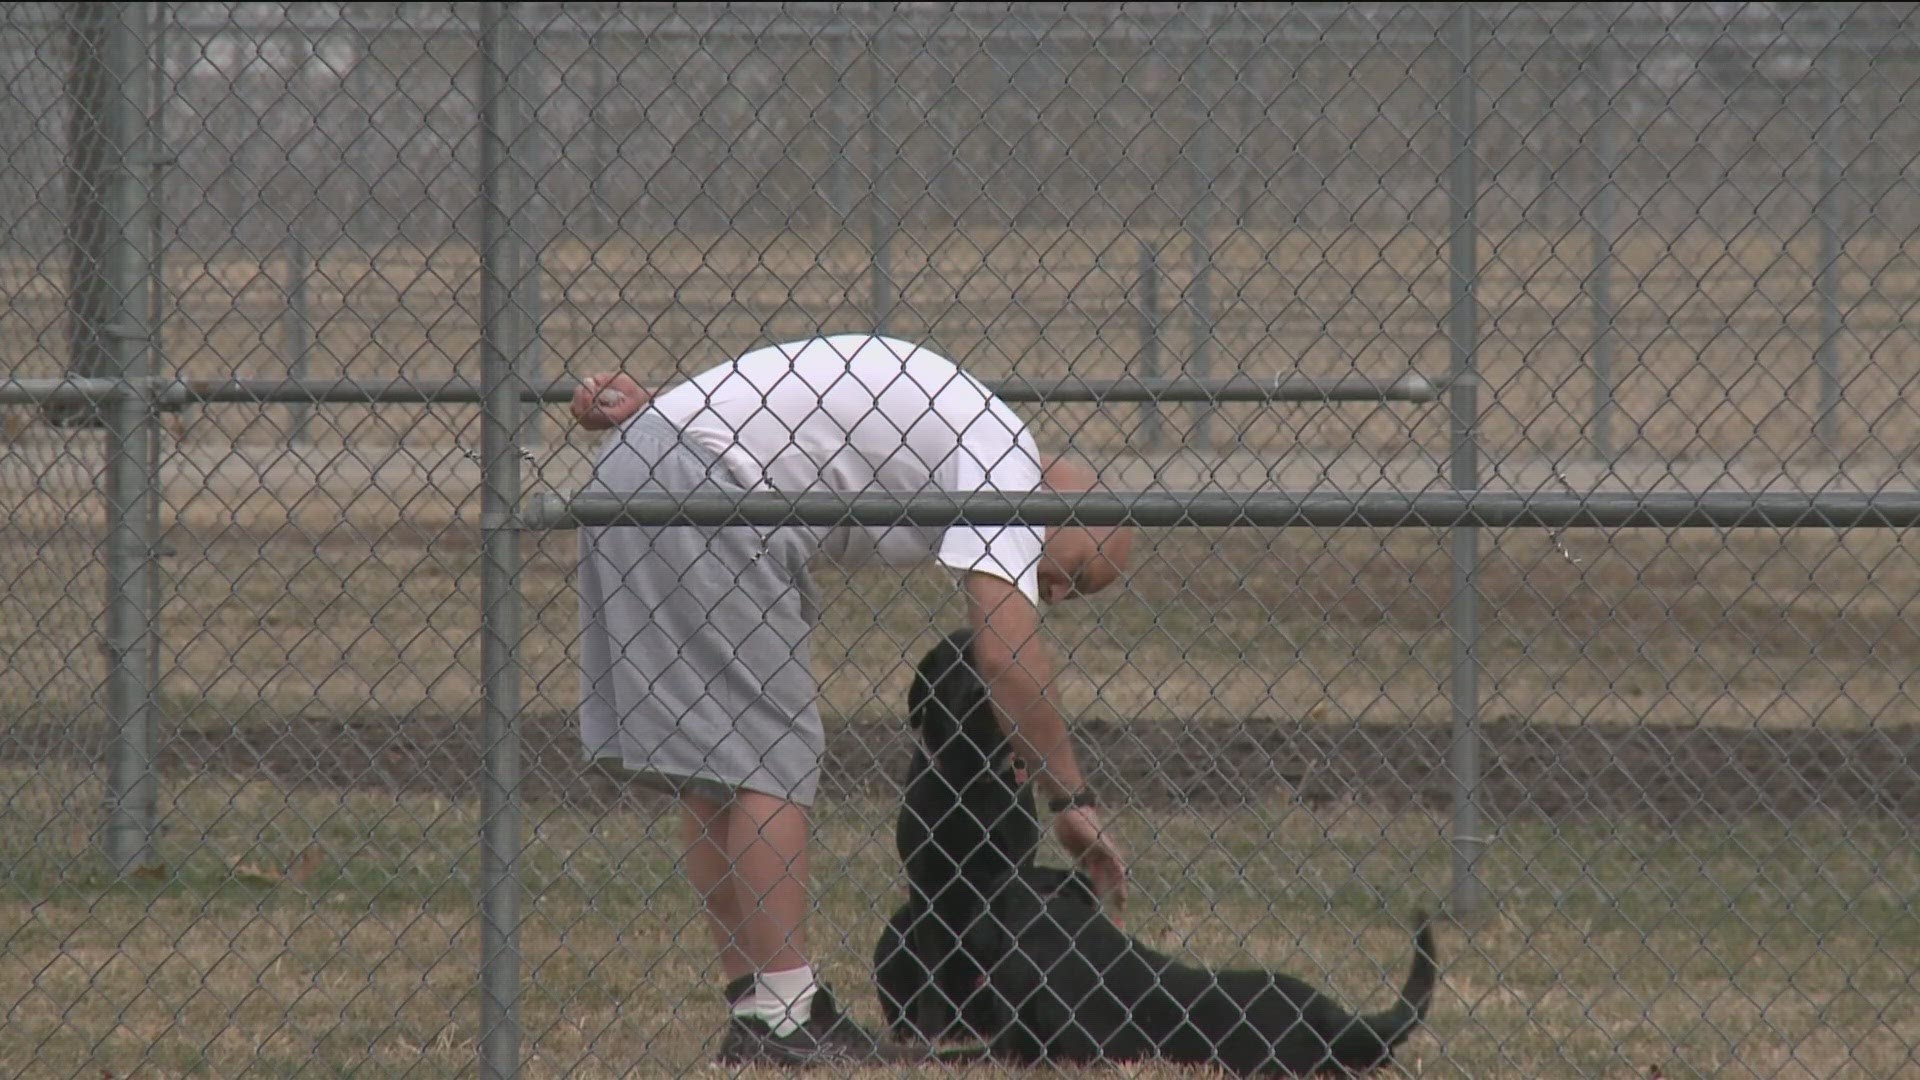 Can Do Canines resumed training operations at the correctional facility Thursday, bringing in two assistance dogs to be cared for and trained by a pair of inmates.